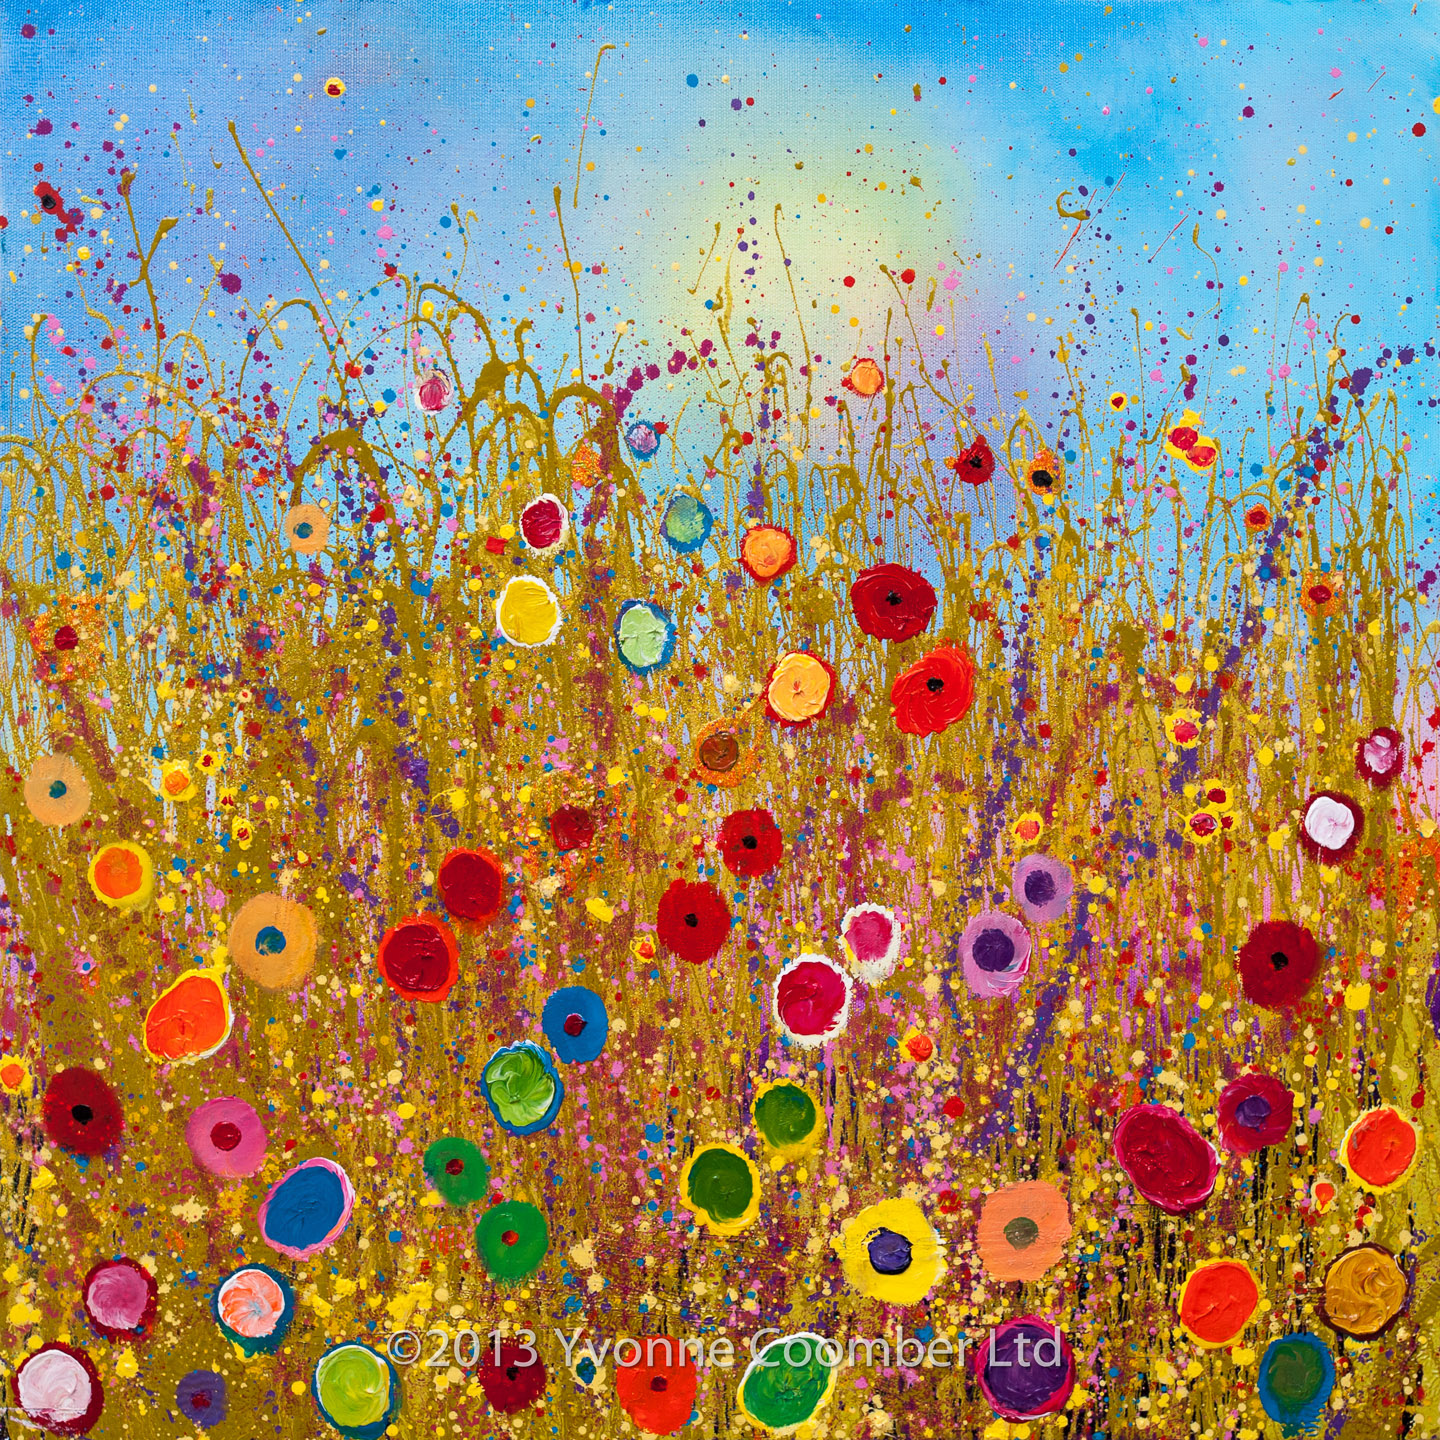 Yvonne Coomber at Imagianation Gallery - St Ives, Cornwall - Art of ...